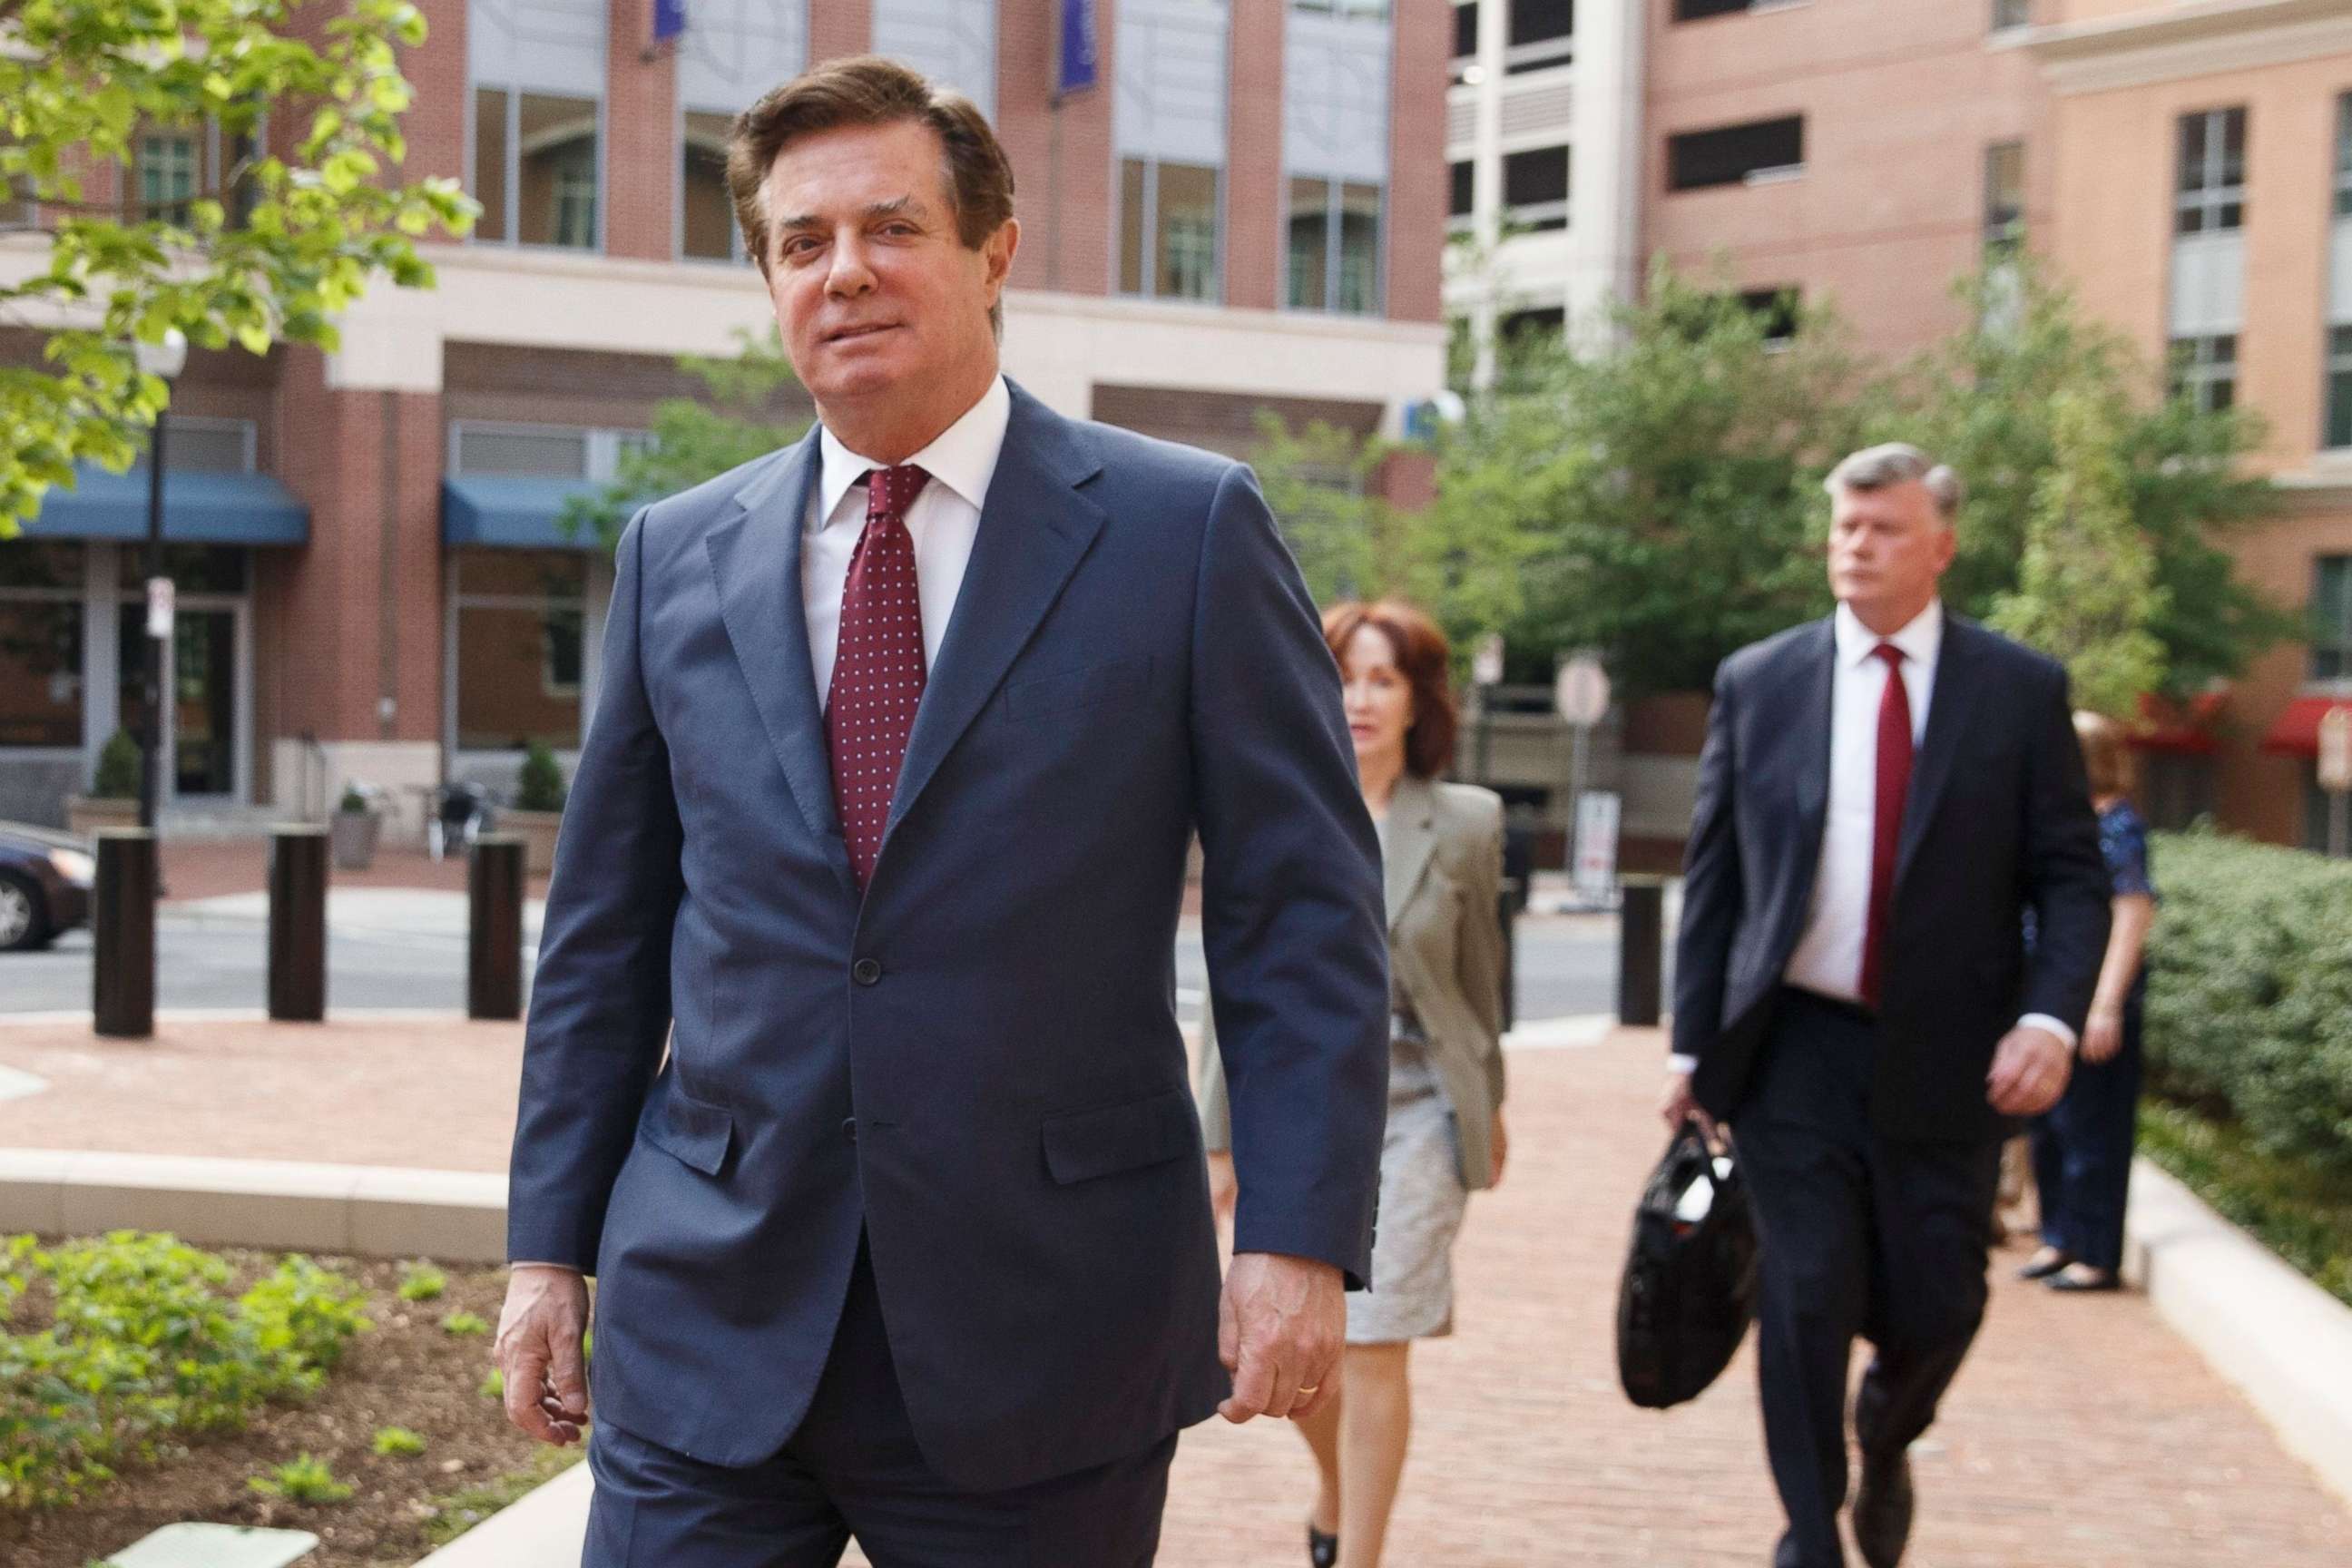 PHOTO: Former Trump campaign manager Paul Manafort arrives for a motion hearing at the U.S. District Court in Alexandria, Va., May 4, 2018.